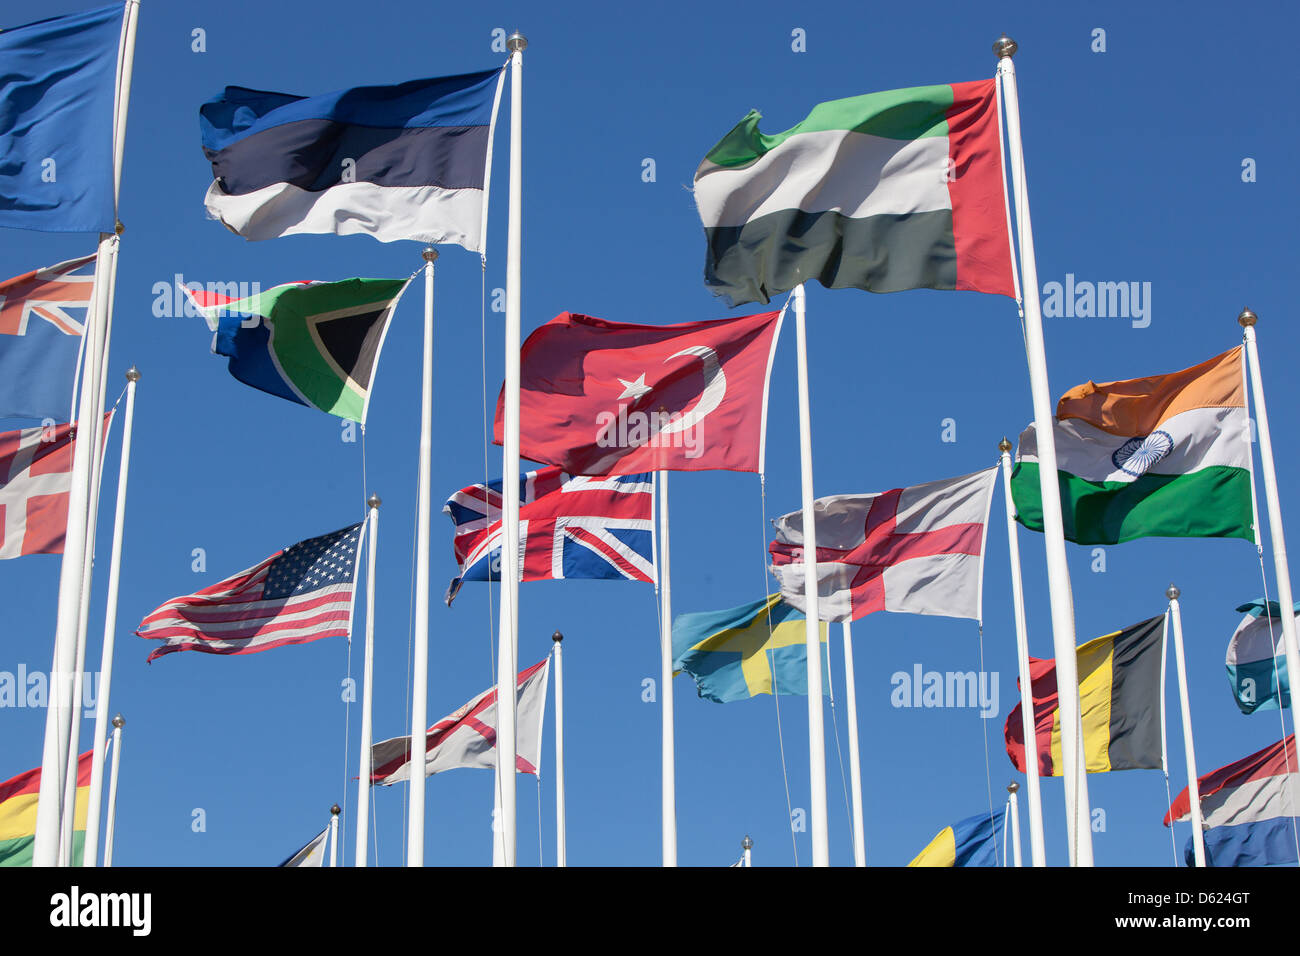 Flags of many nations fluttering in the breeze. Stock Photo